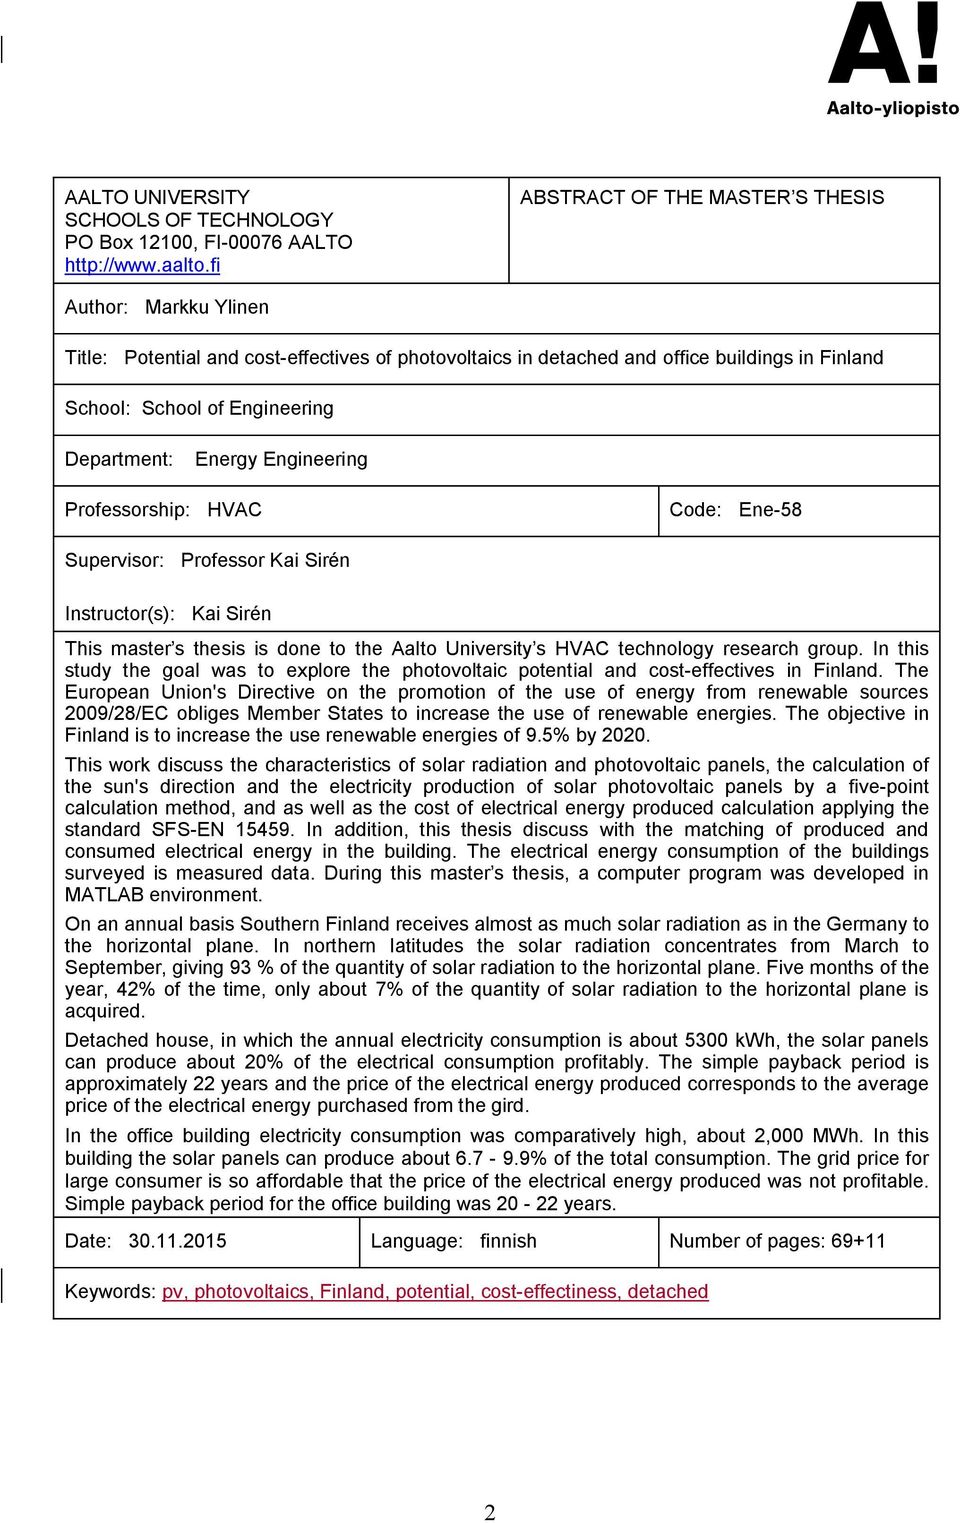 Energy Engineering Professorship: HVAC Code: Ene-58 Supervisor: Professor Kai Sirén Instructor(s): Kai Sirén This master s thesis is done to the Aalto University s HVAC technology research group.